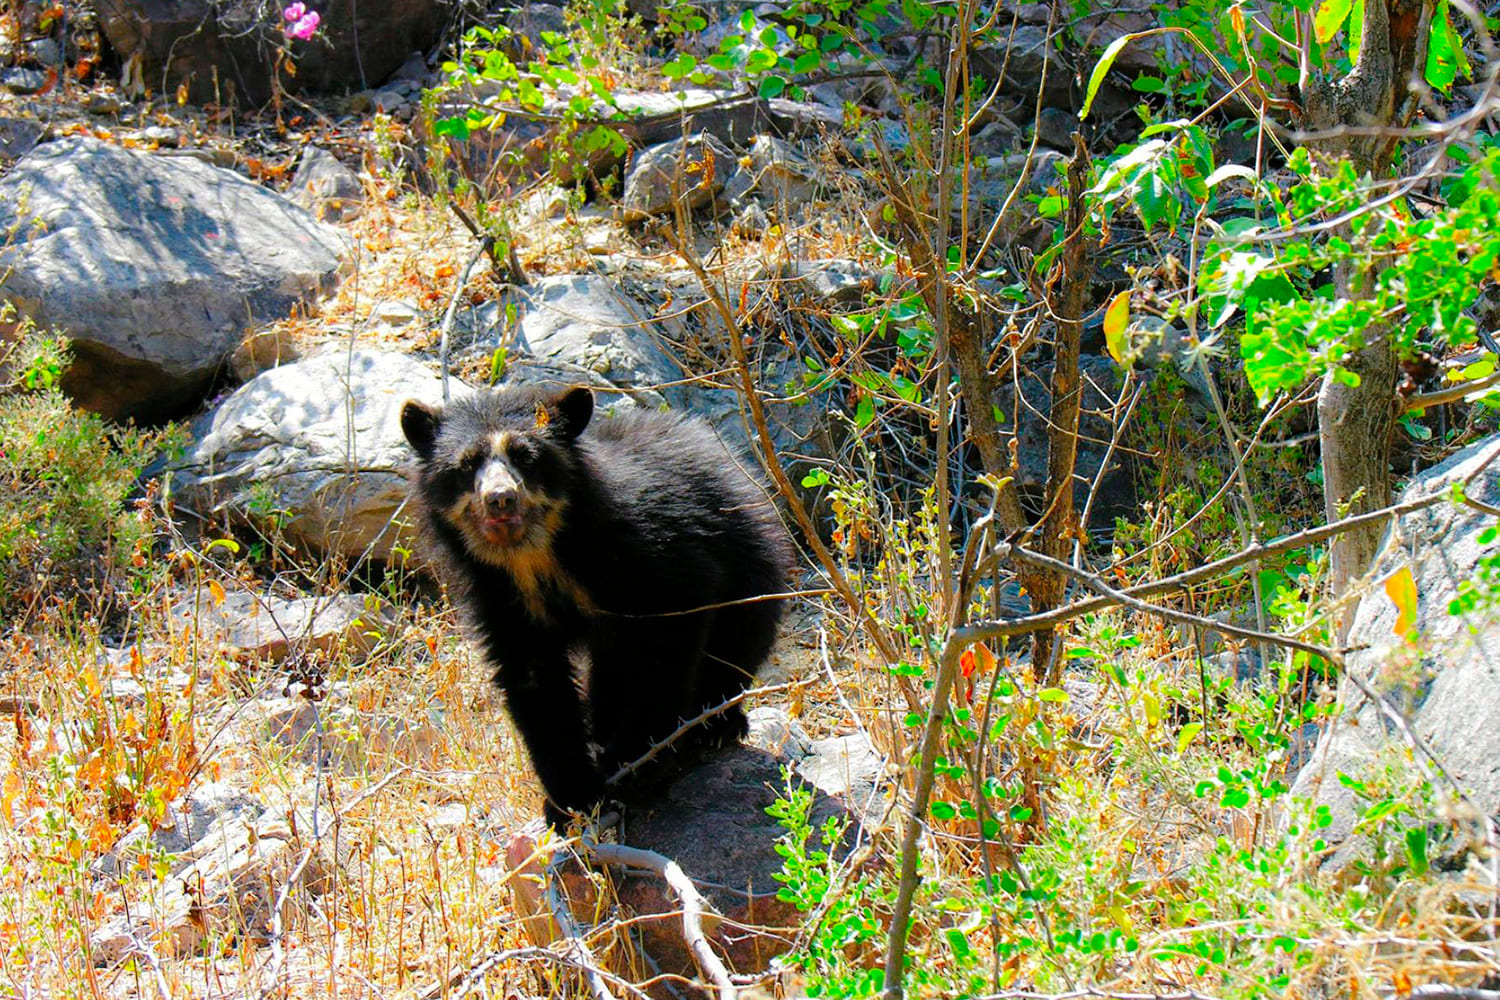 IT IS COMMON TO SEE SPECTACLED BEARS AND THEIR CUBS IN MACHU PICCHU